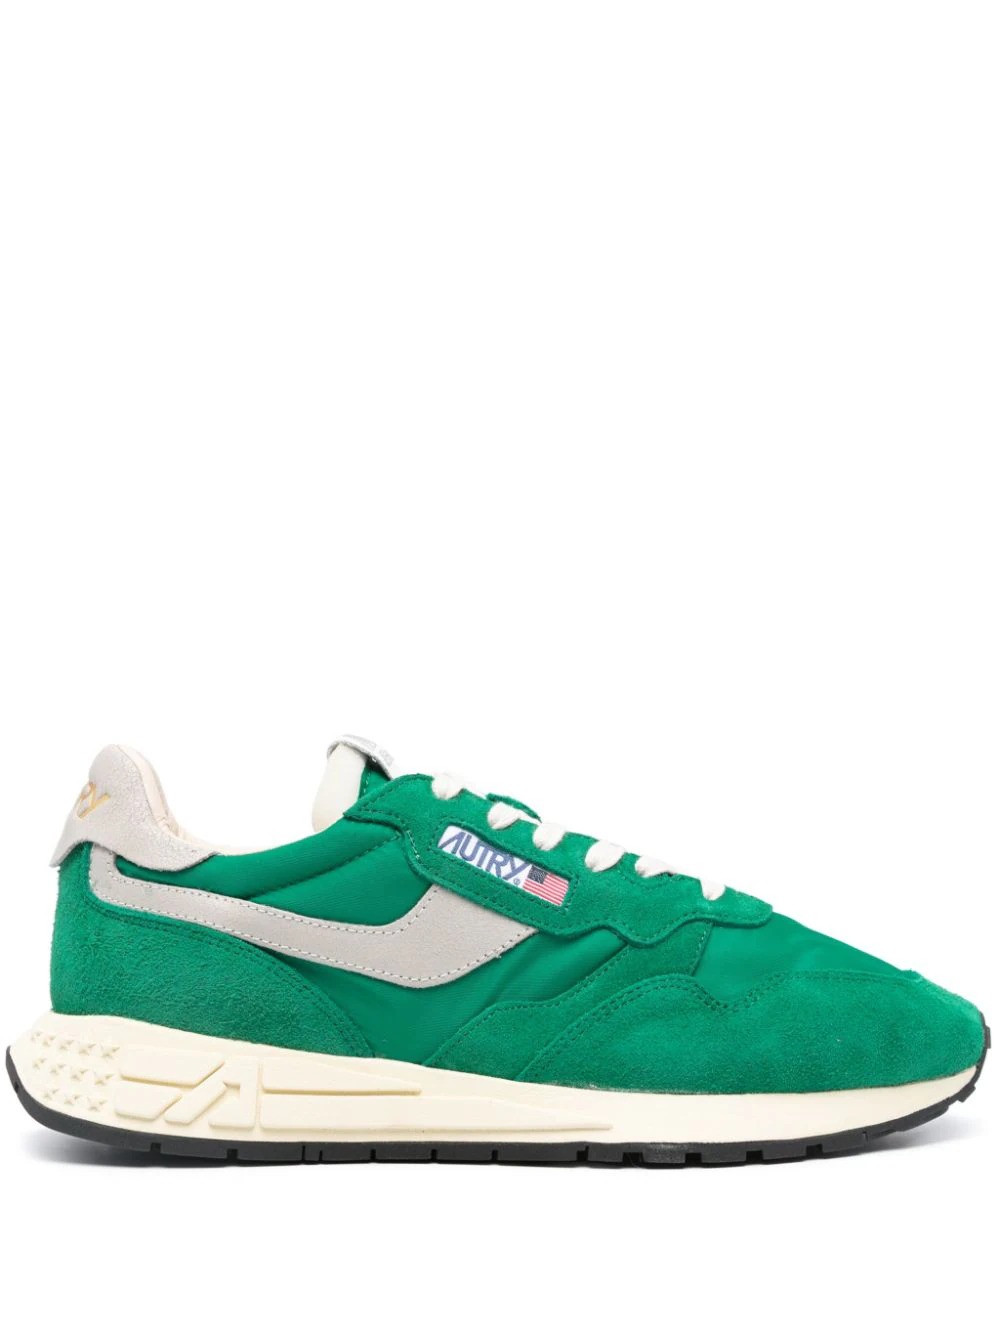 Reelwind Low Sneakers In Green Nylon and Suede - AUTRY - Russocapri